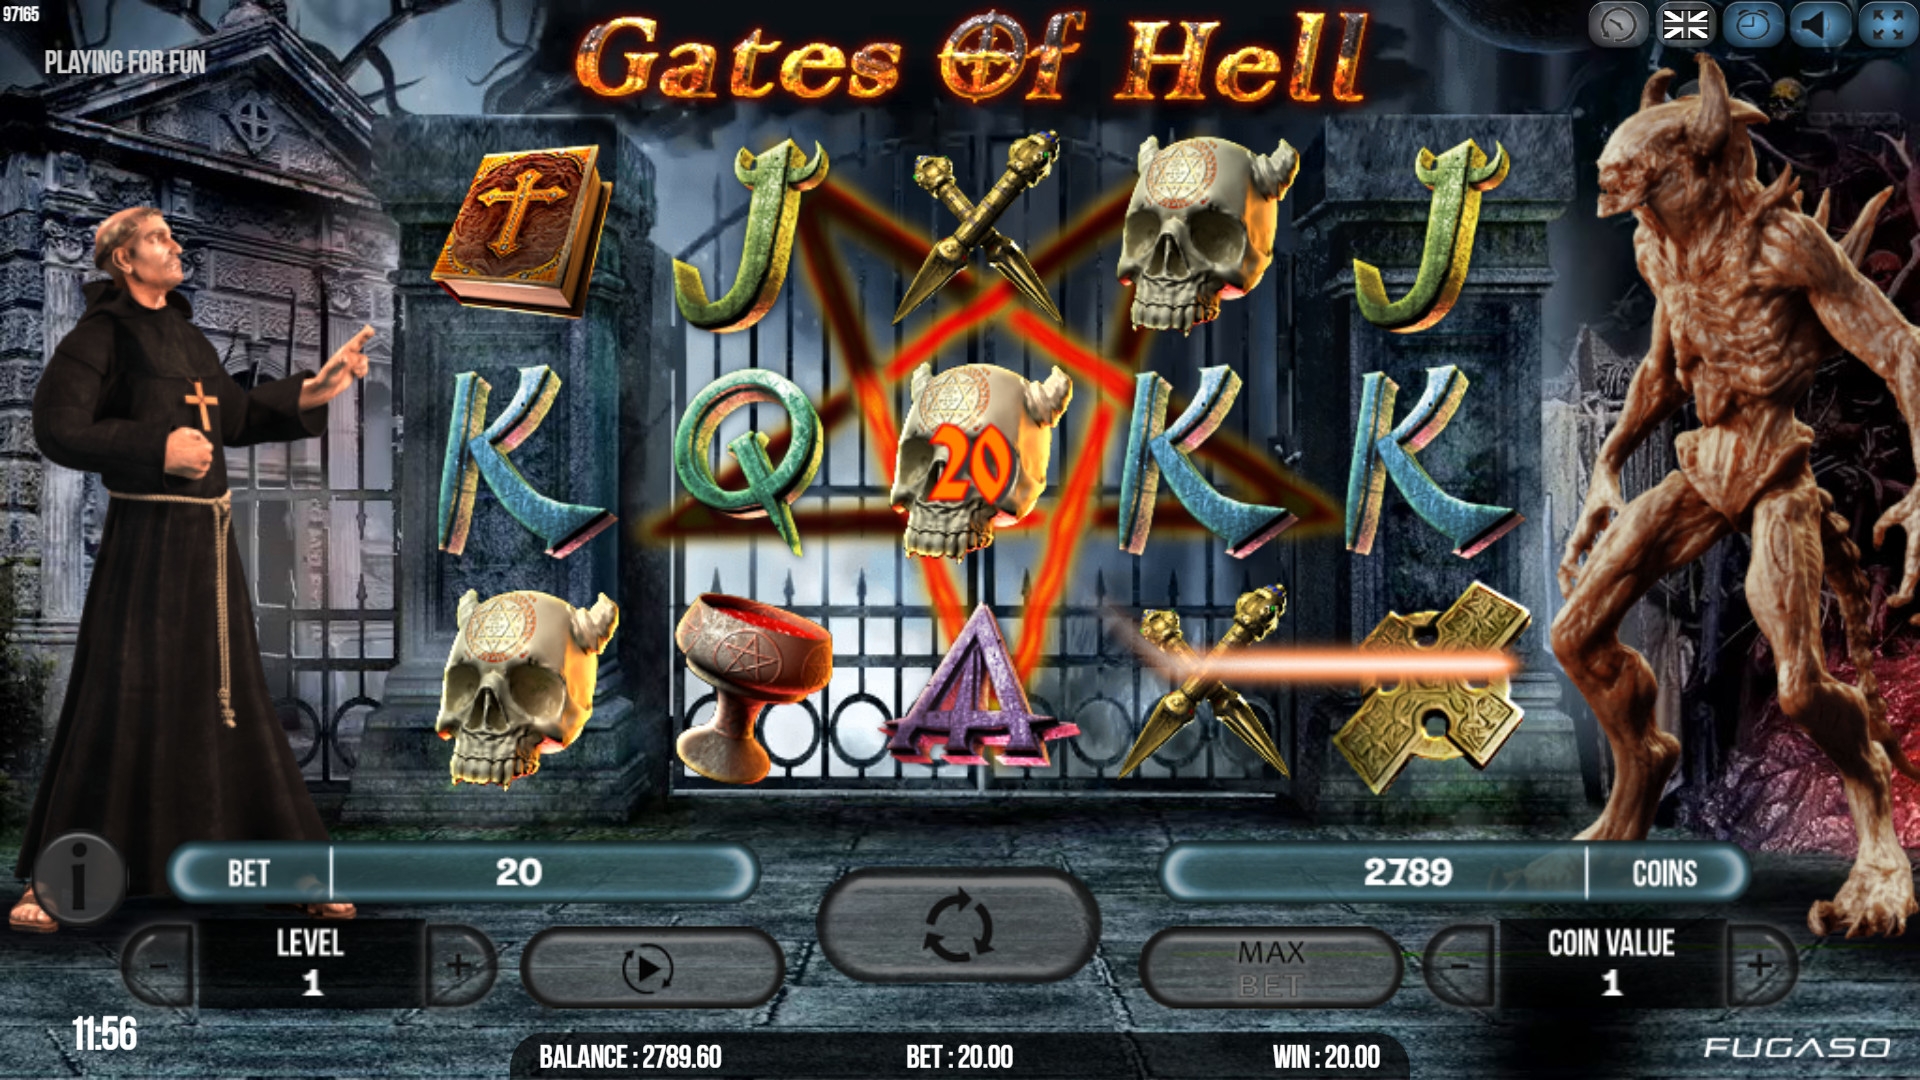 Gates of Hell (Gates of Hell) from category Slots